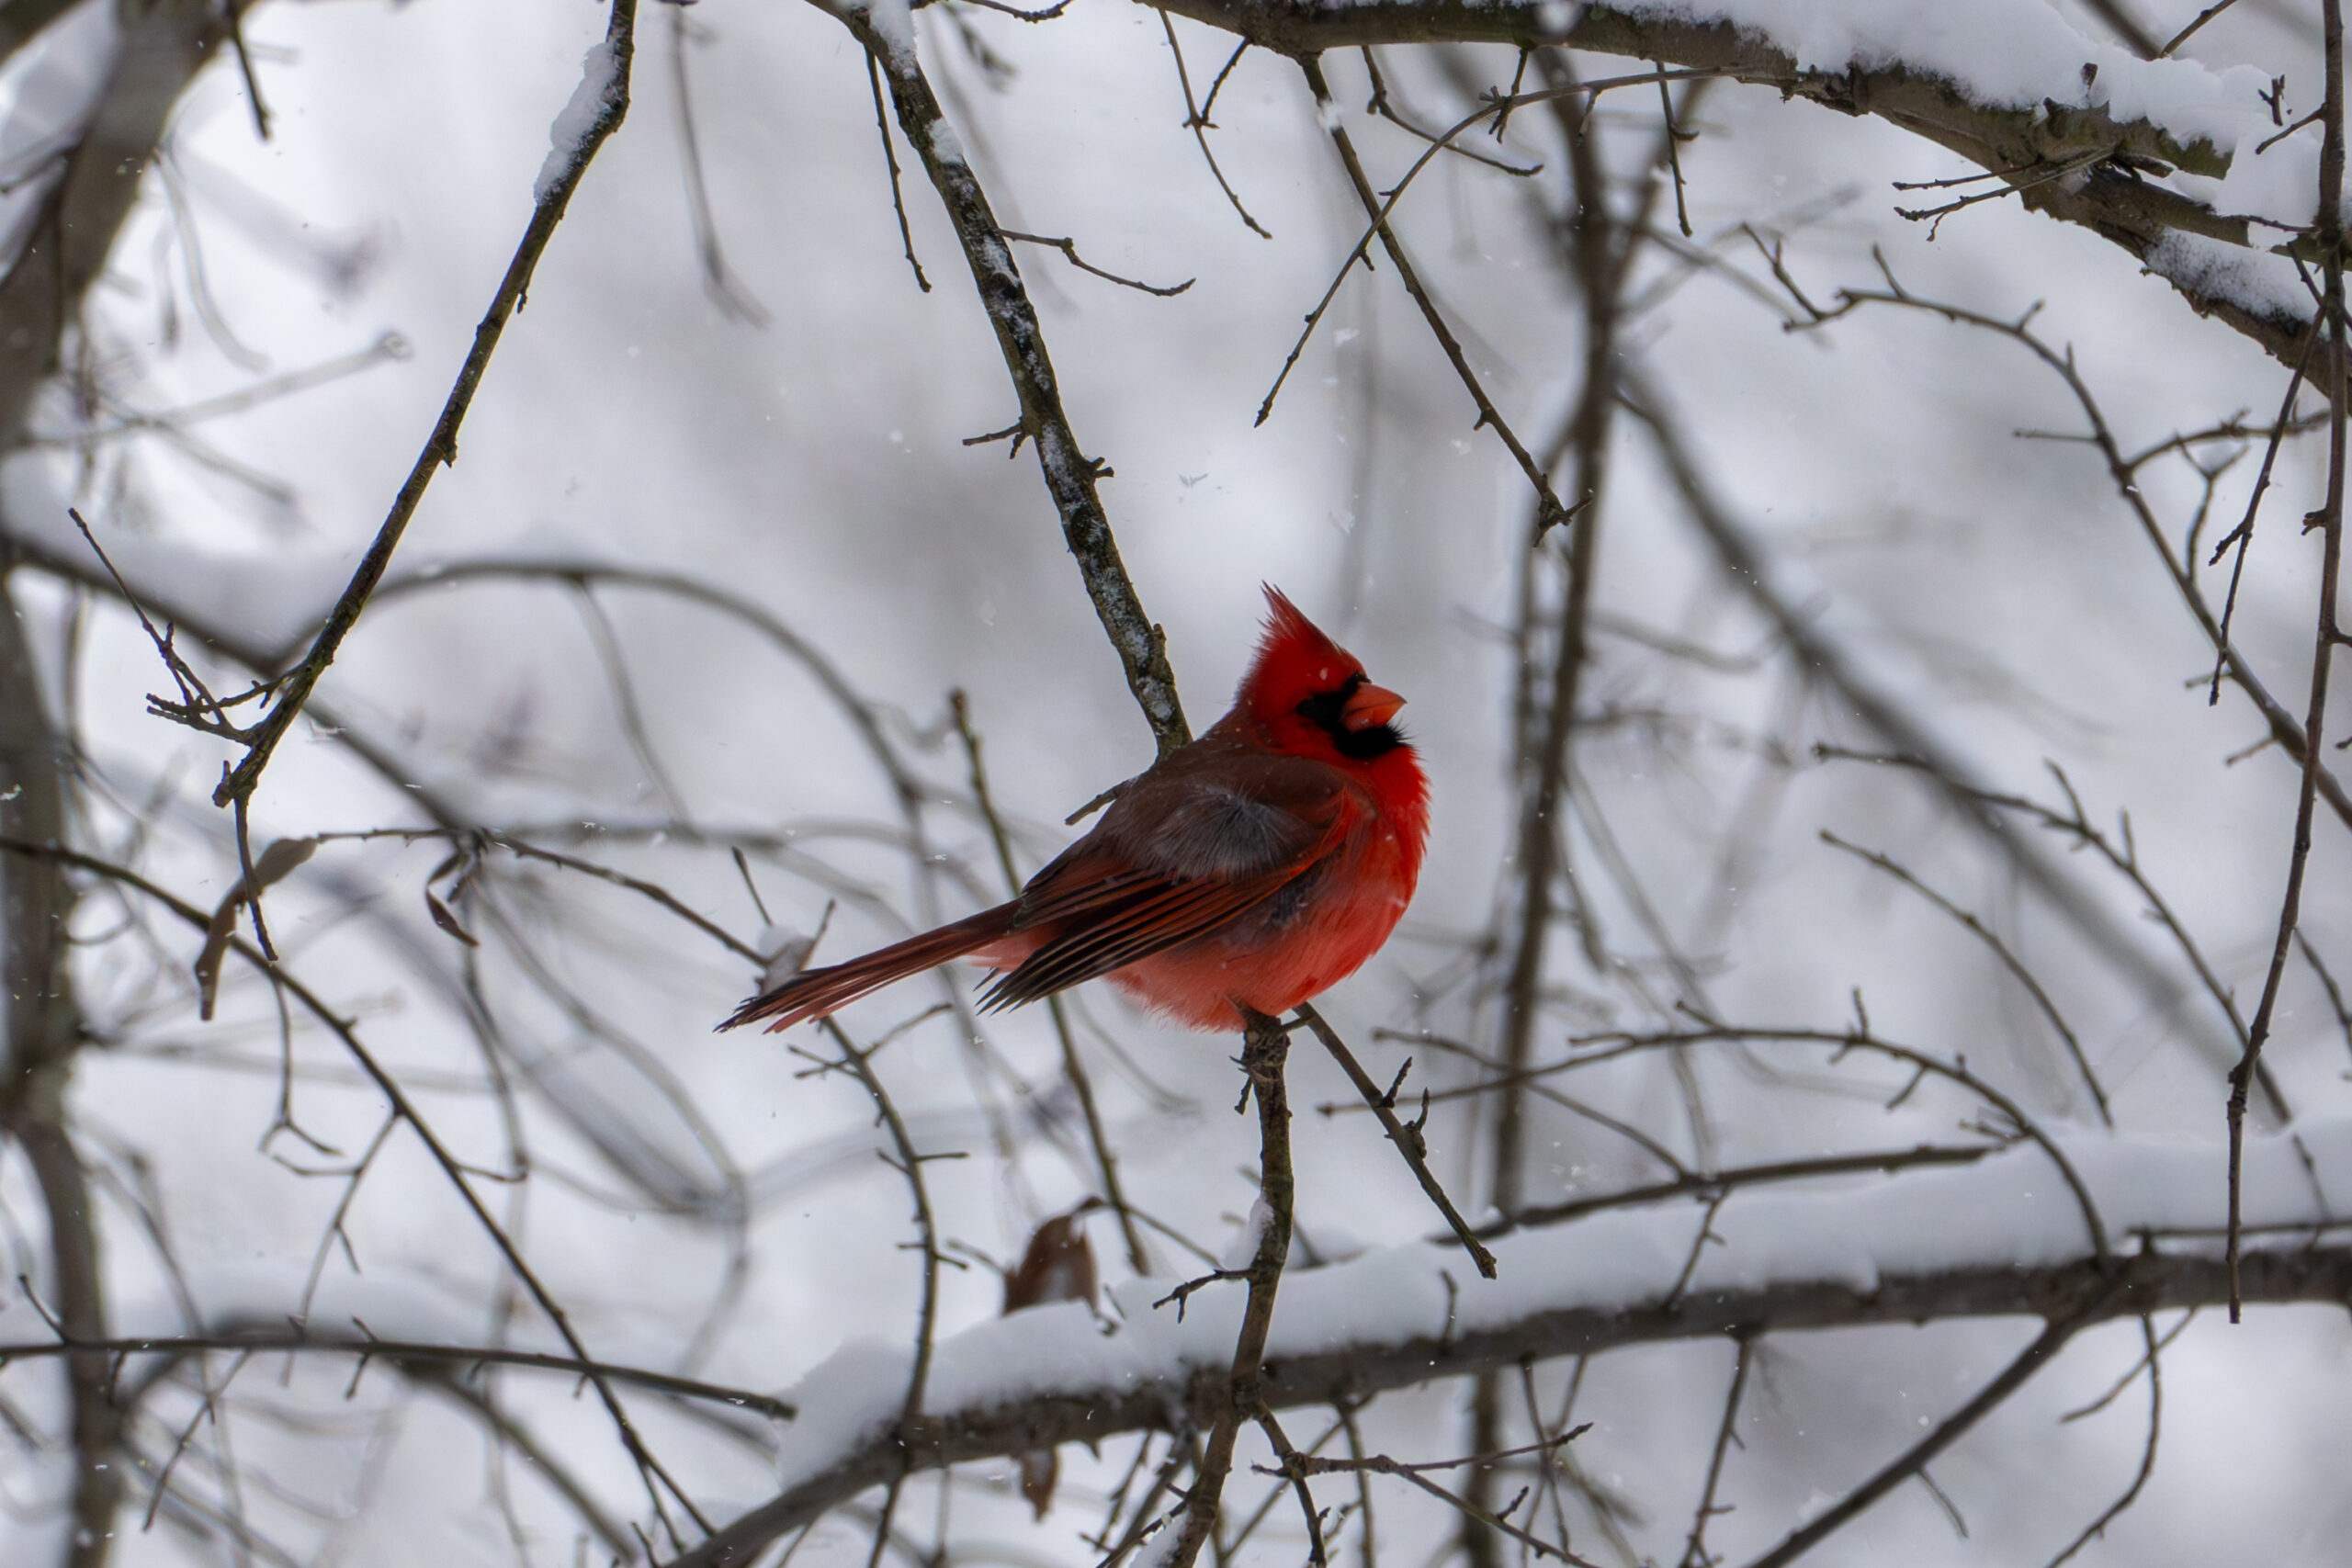 A photography of a Northern Cardinal in profile, sitting on a snowy branch